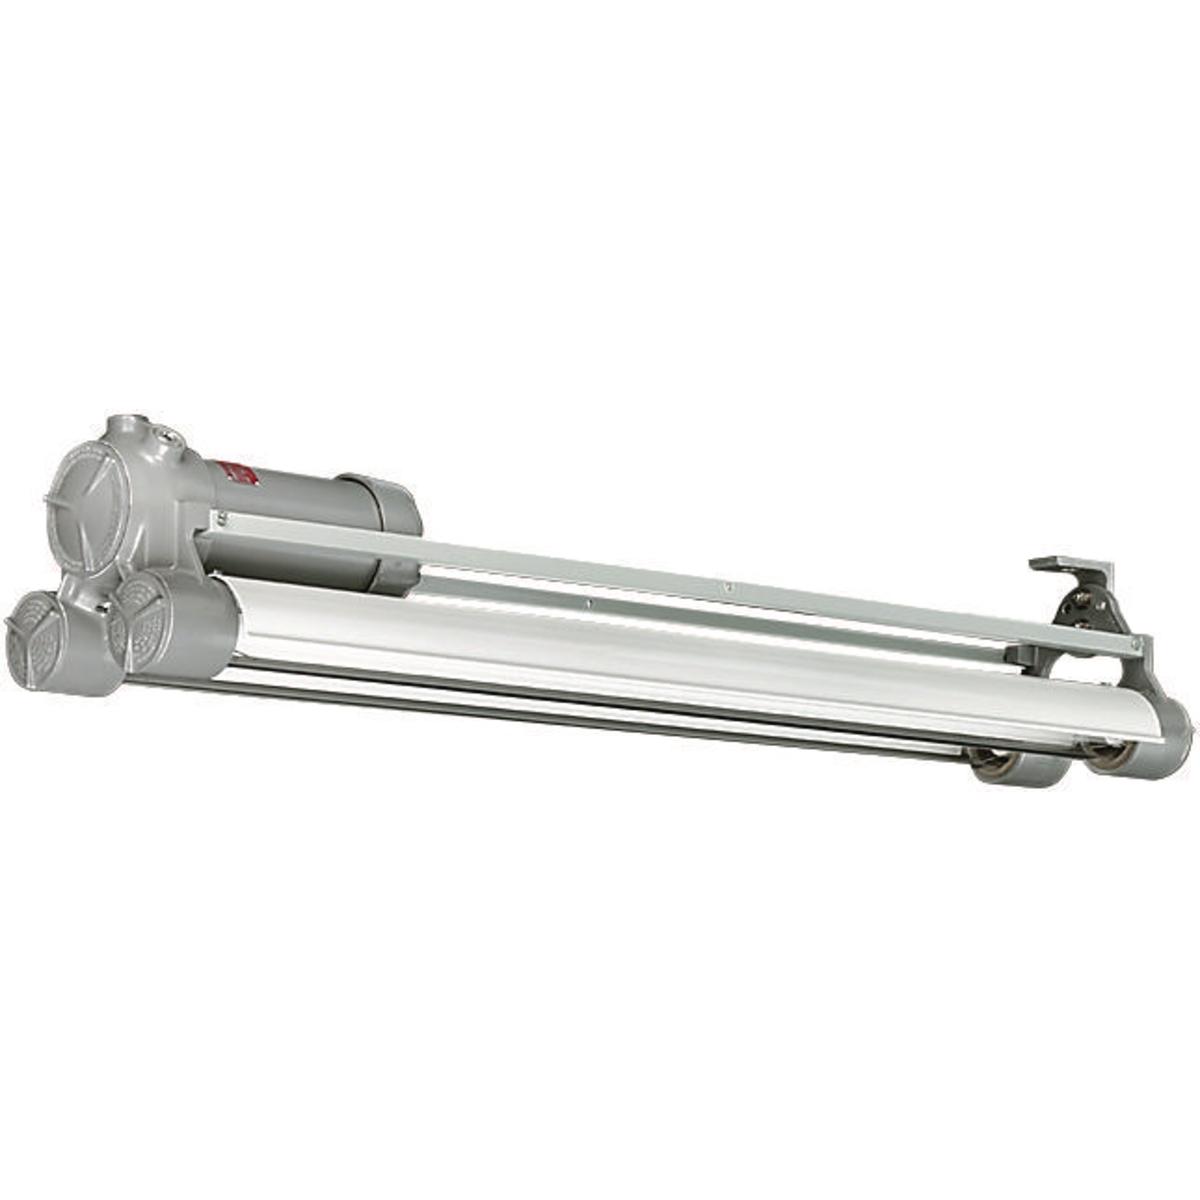 Hubbell HFX-430-72-FB HFX 40W 220V 2 Lamp with Fused Ballast  ; UL Listed and labeled for use inside paint spray booths and rooms ; 2’ nominal compact models facilitate use in areas too small for nominal 4’ models, or where the light must be confined ; Standard ballast is 120-